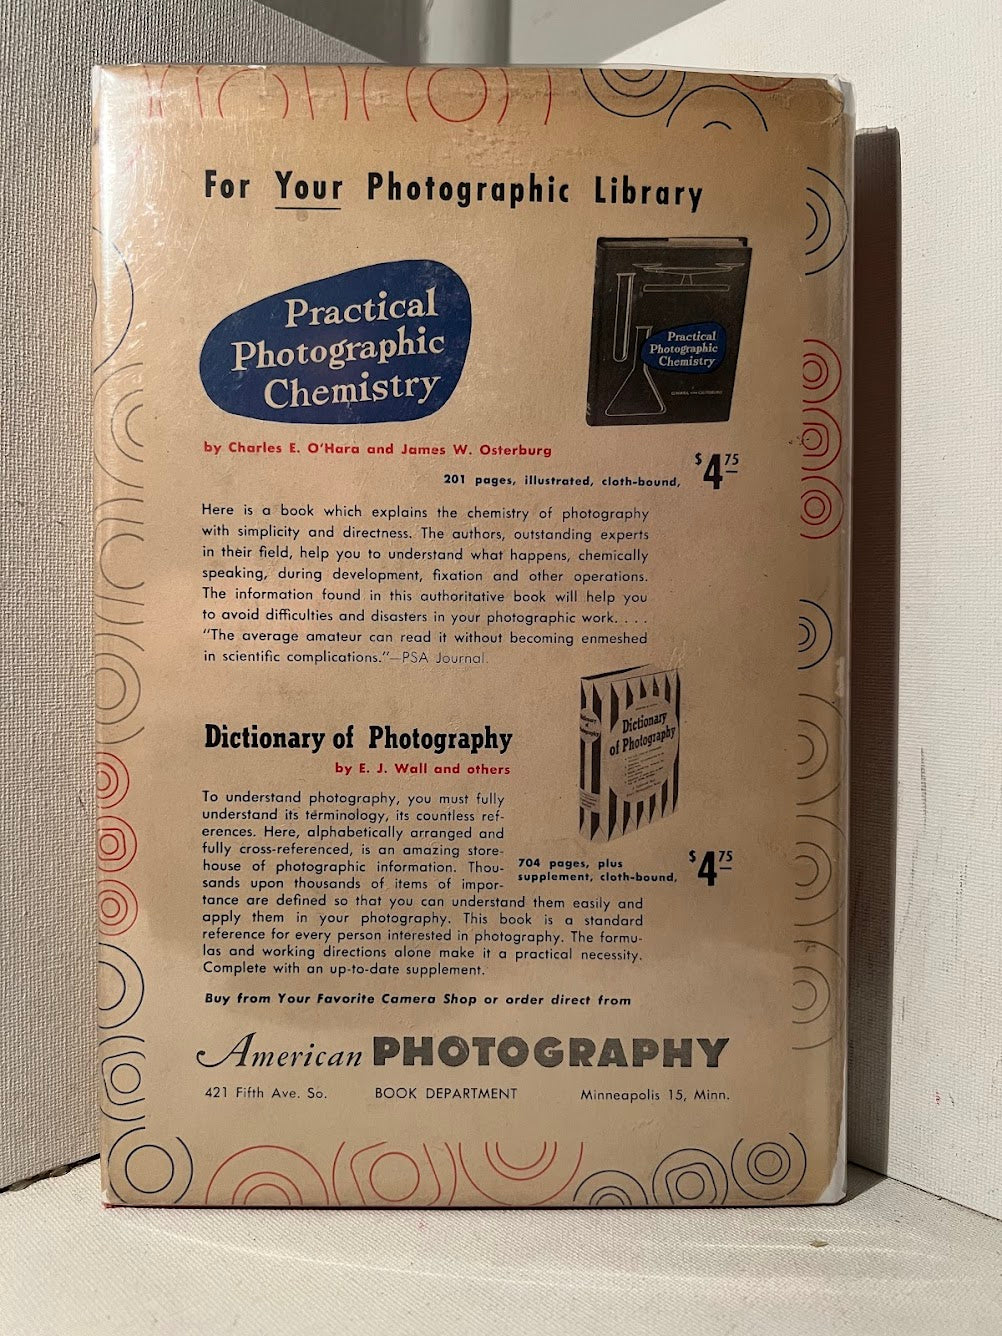 3 Dimensional Photography: Principles of Stereoscopy by Herbert C. McKay